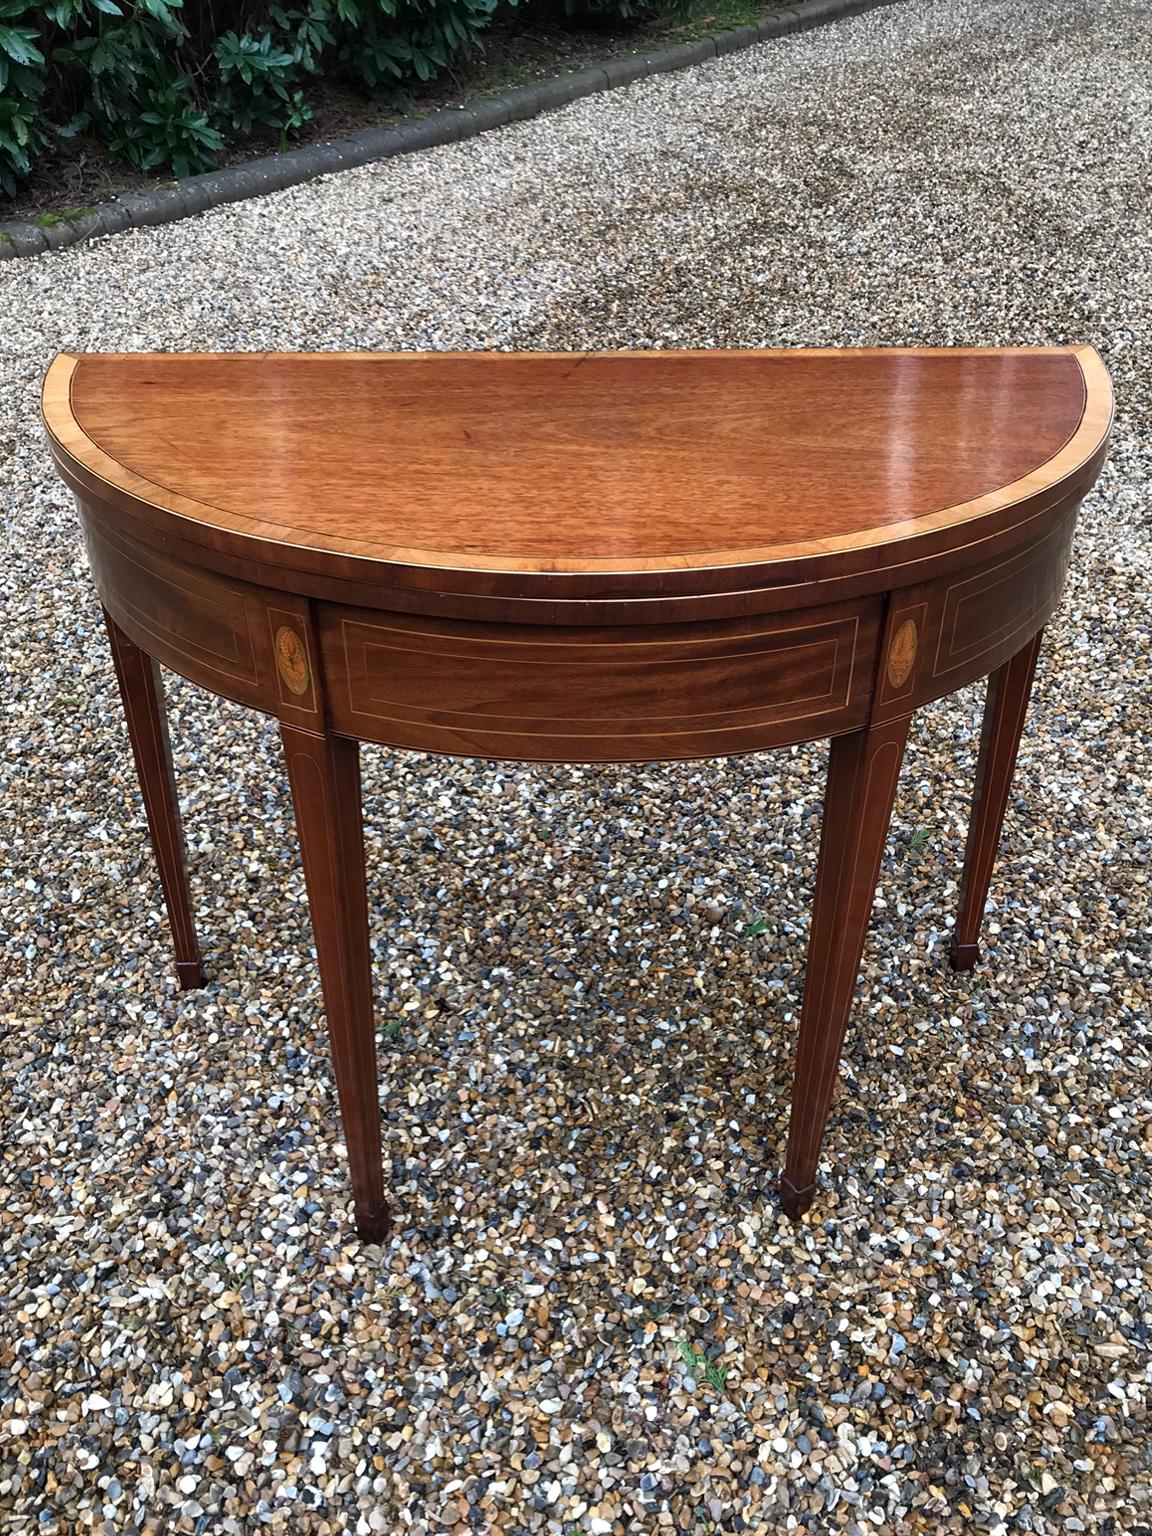 19th century Georgian mahogany demilune card table with satinwood inlay on square tapering legs. With newly fitted baize.

circa 1820-1830

Dimensions:
Height: 29 inches – 74 cms
Width: 37 inches – 94 cms
Depth: 18 inches – 46